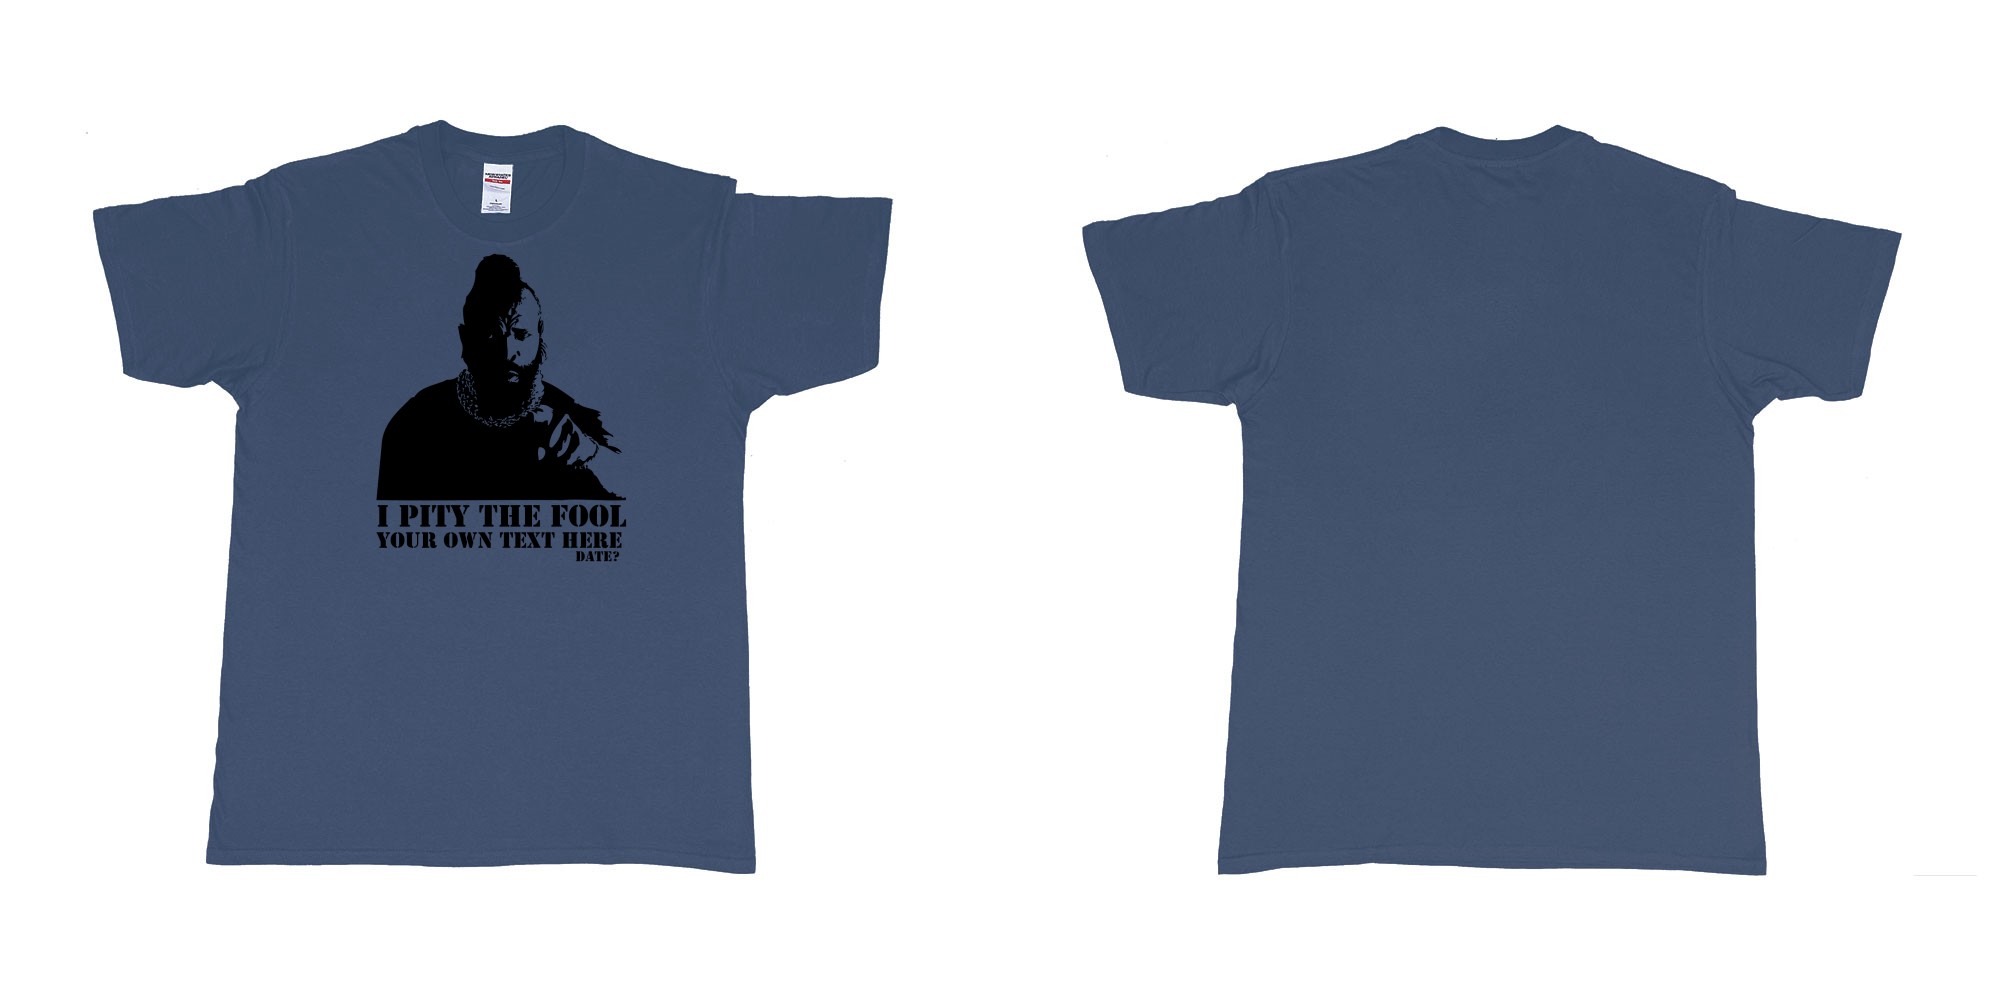 Custom tshirt design I pity the fool in fabric color navy choice your own text made in Bali by The Pirate Way